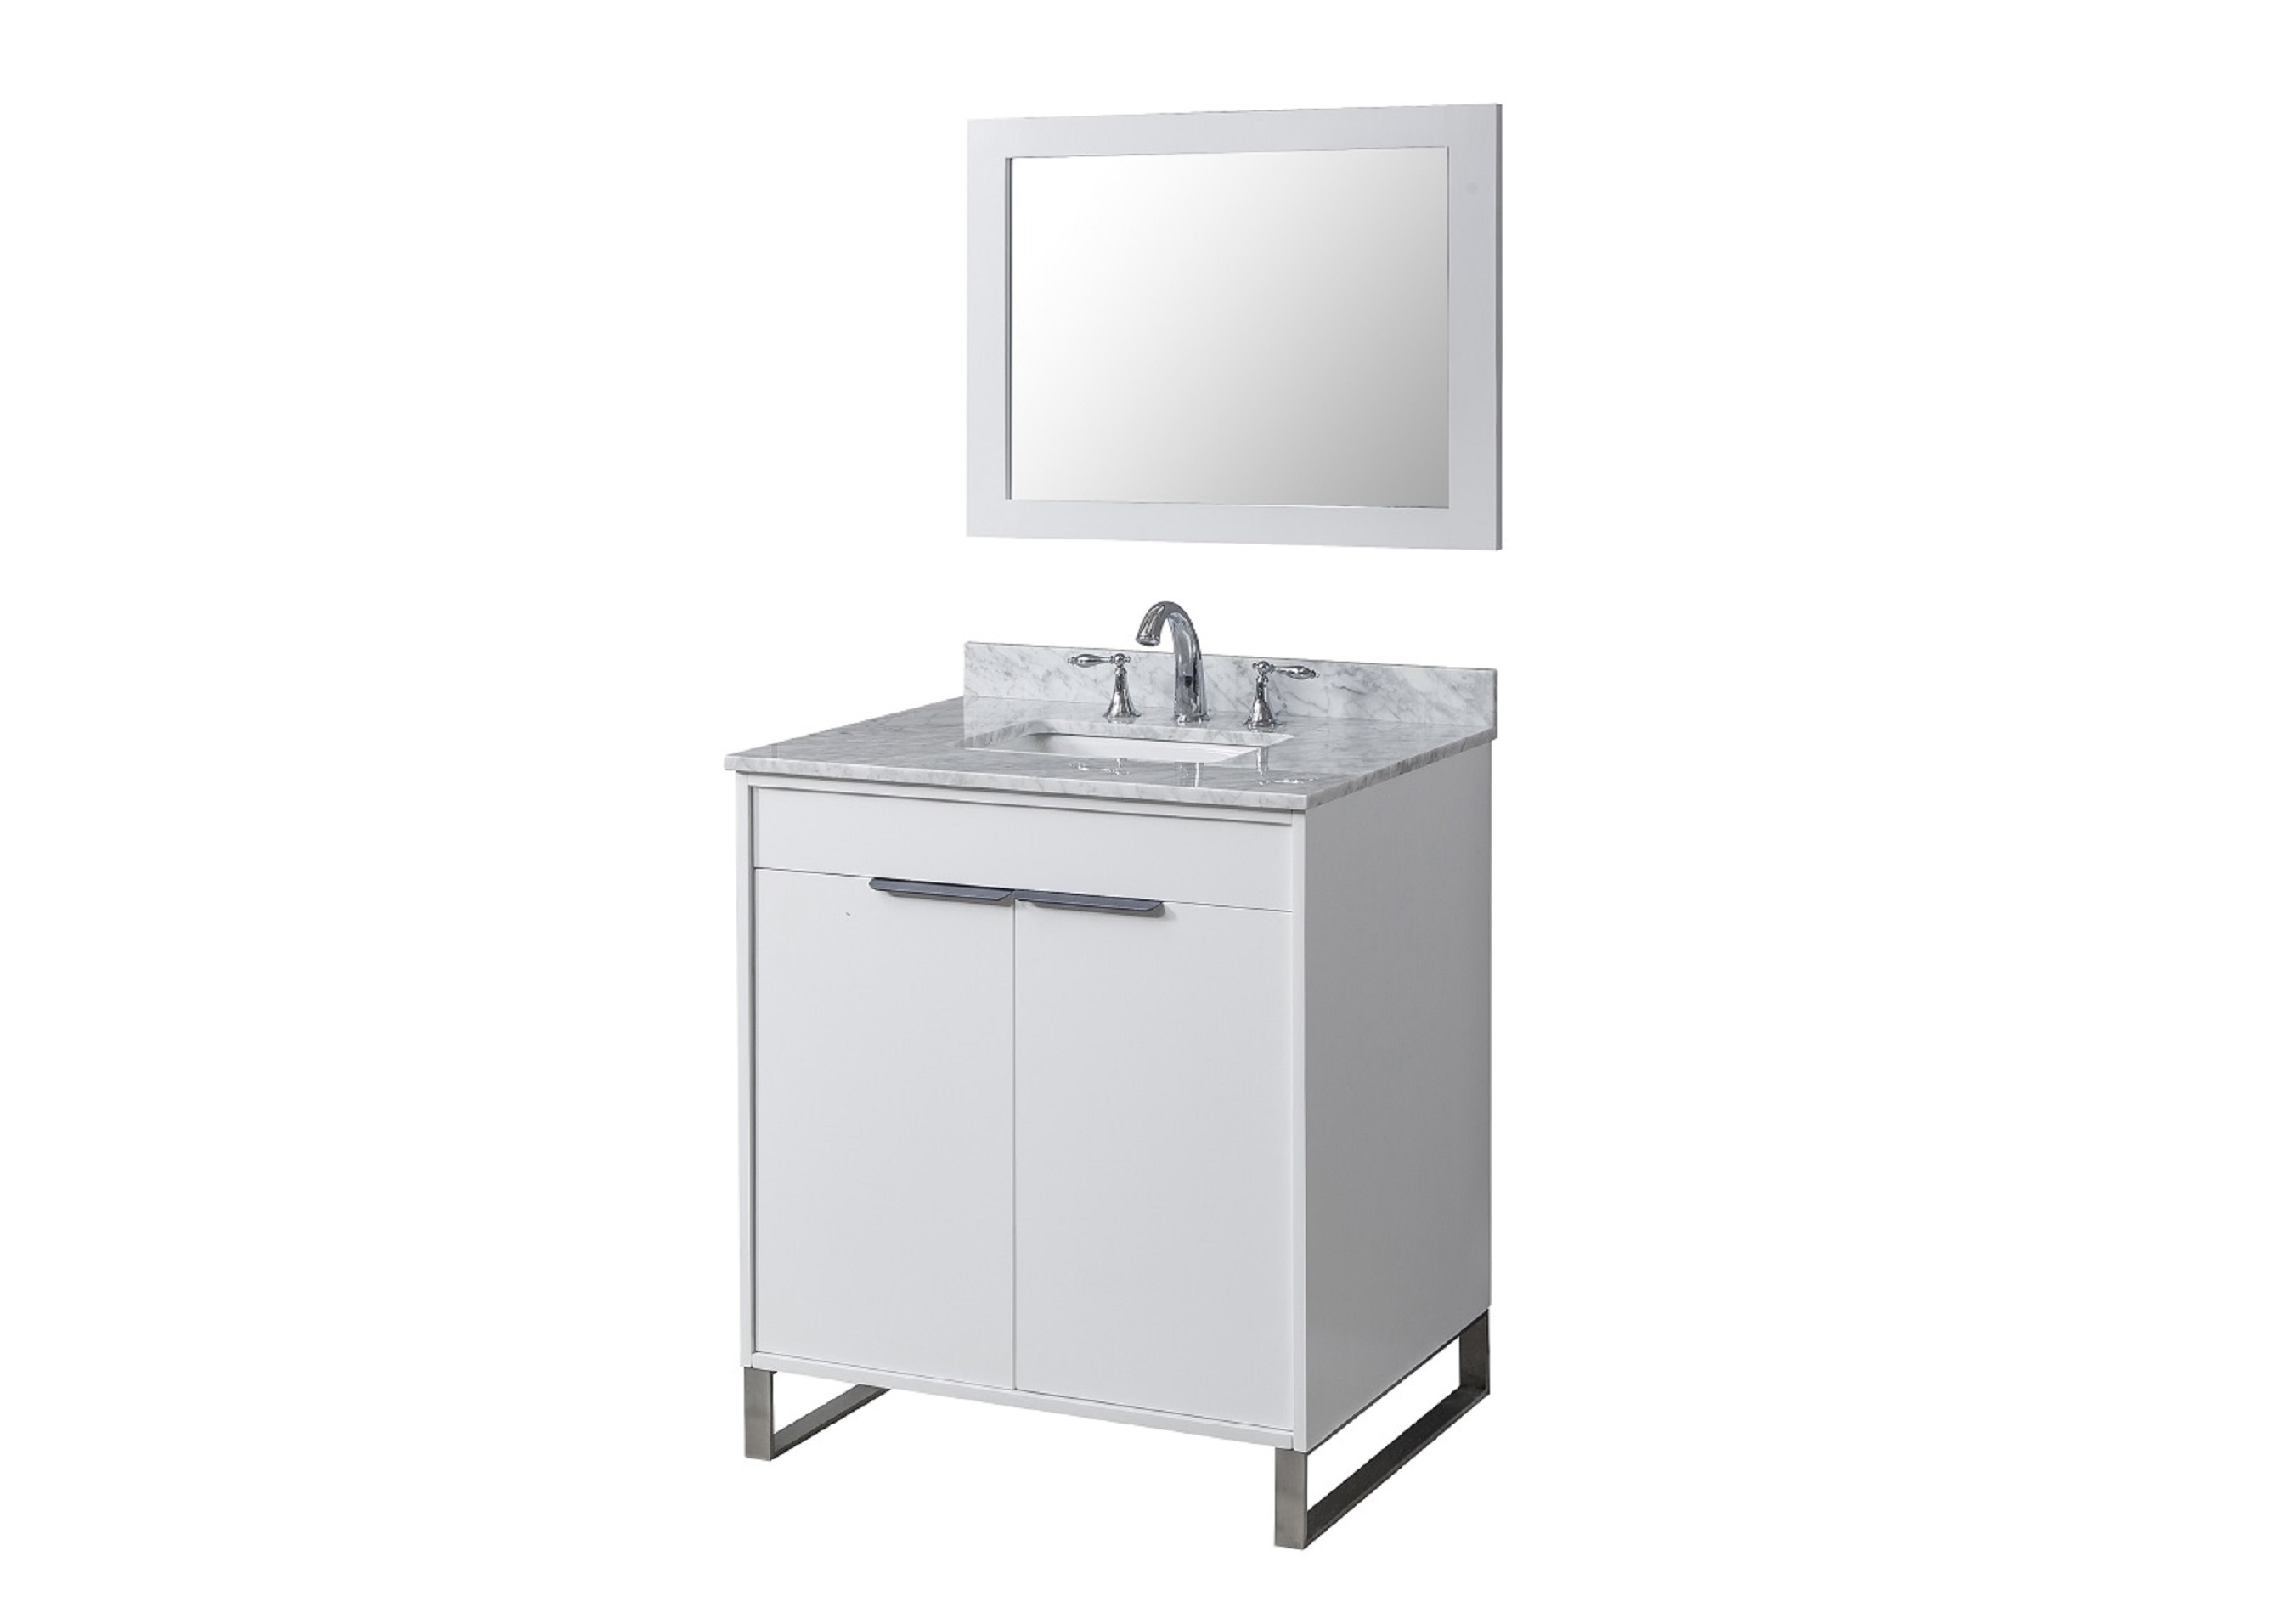 32" Bathroom Vanity in White with White Carrara Marble Top with white basins